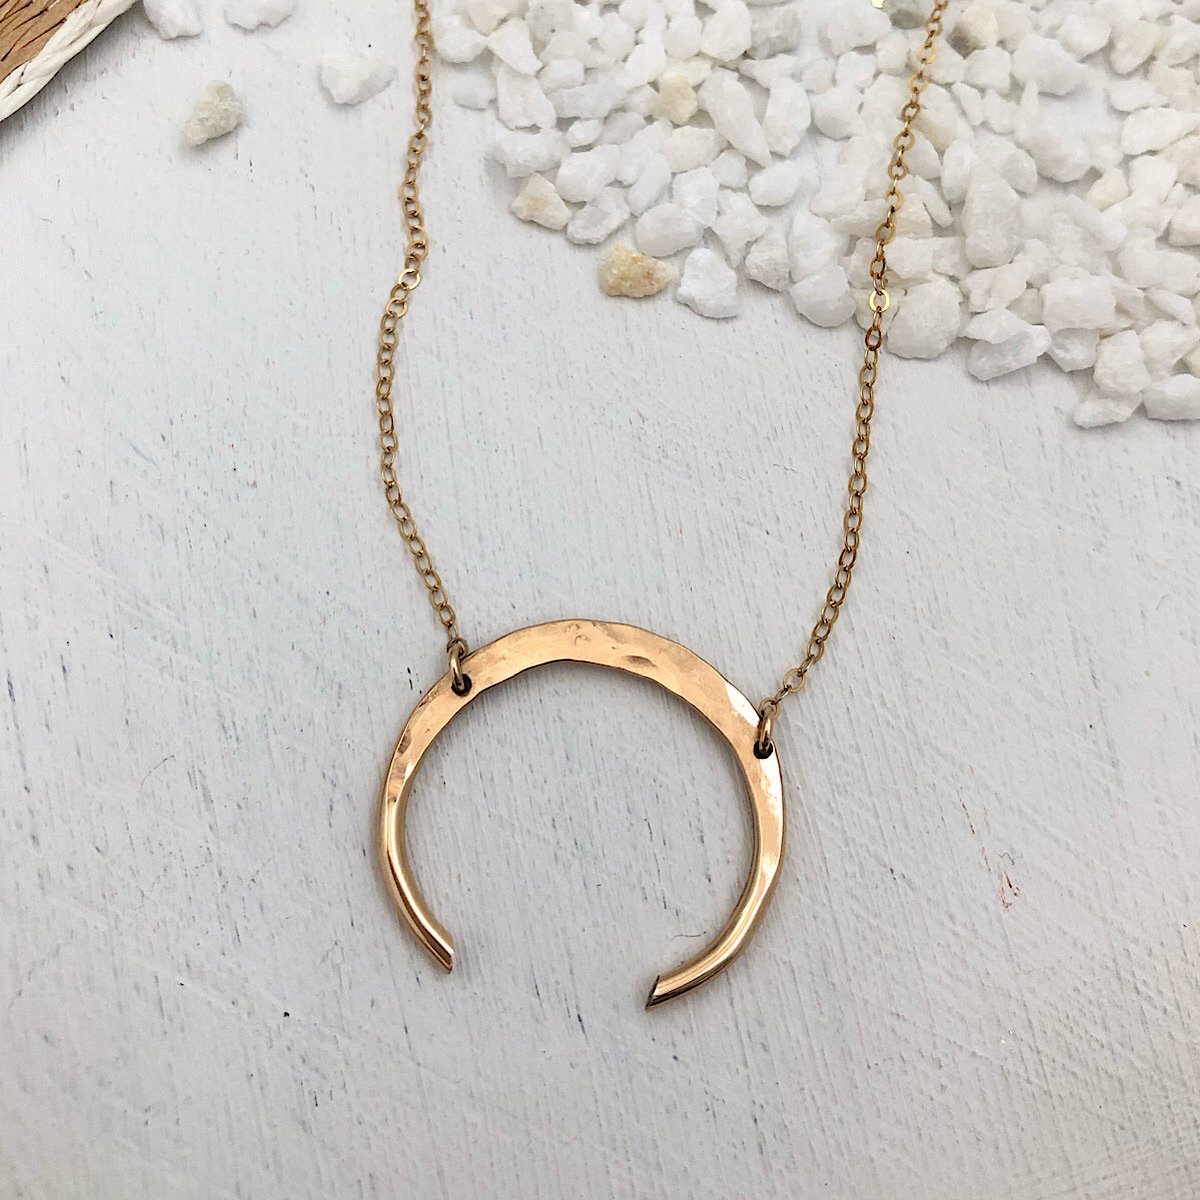 Phoebe New Moon Necklace